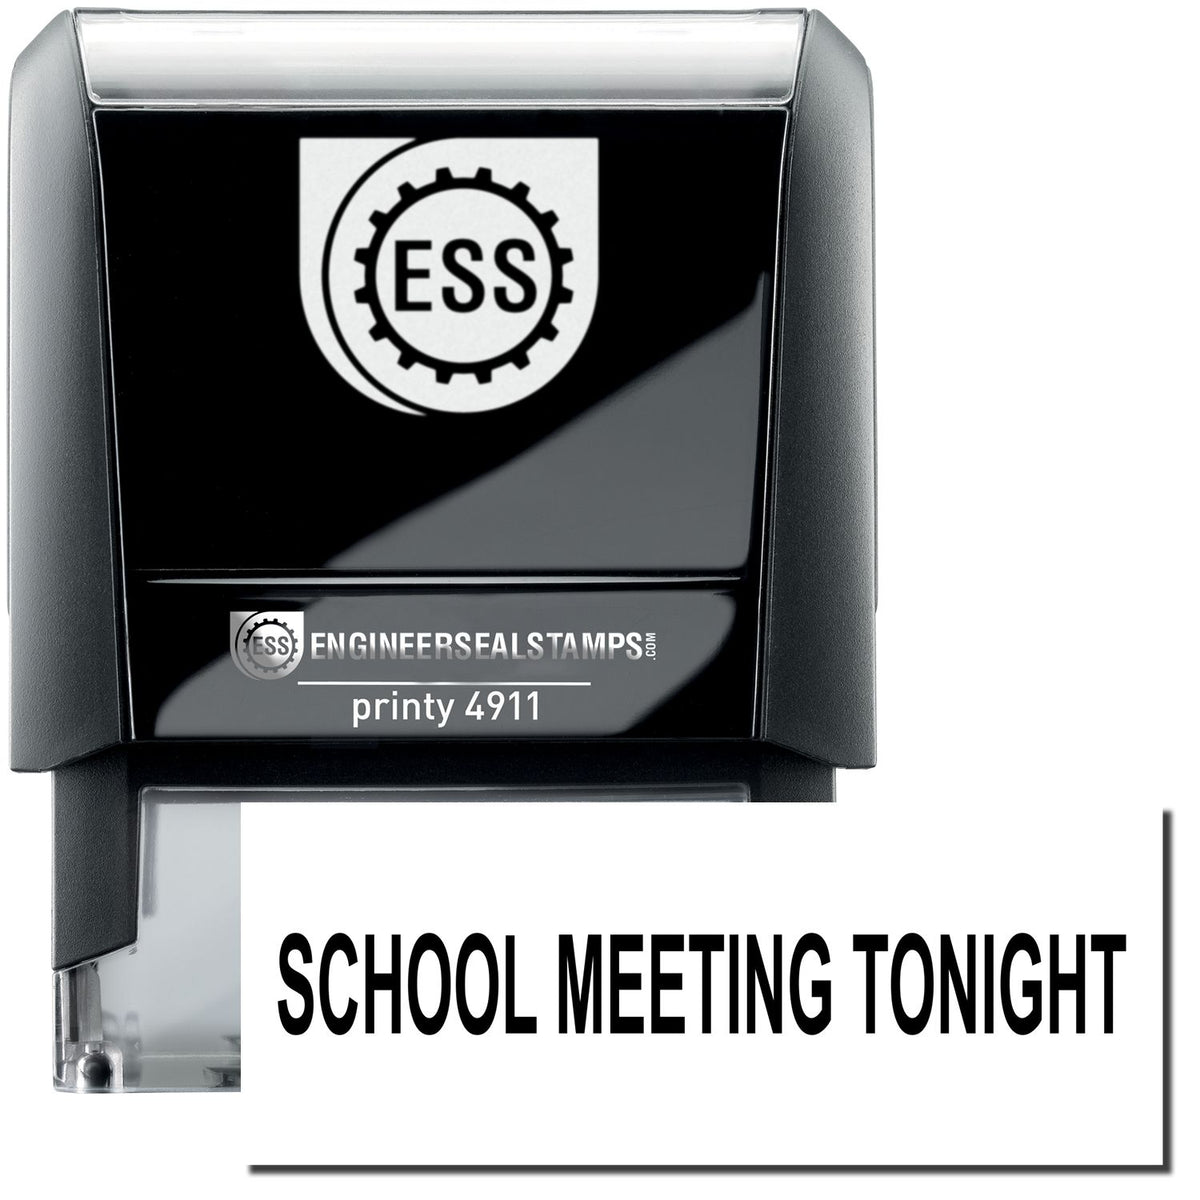 A self-inking stamp with a stamped image showing how the text &quot;SCHOOL MEETING TONIGHT&quot; is displayed after stamping.